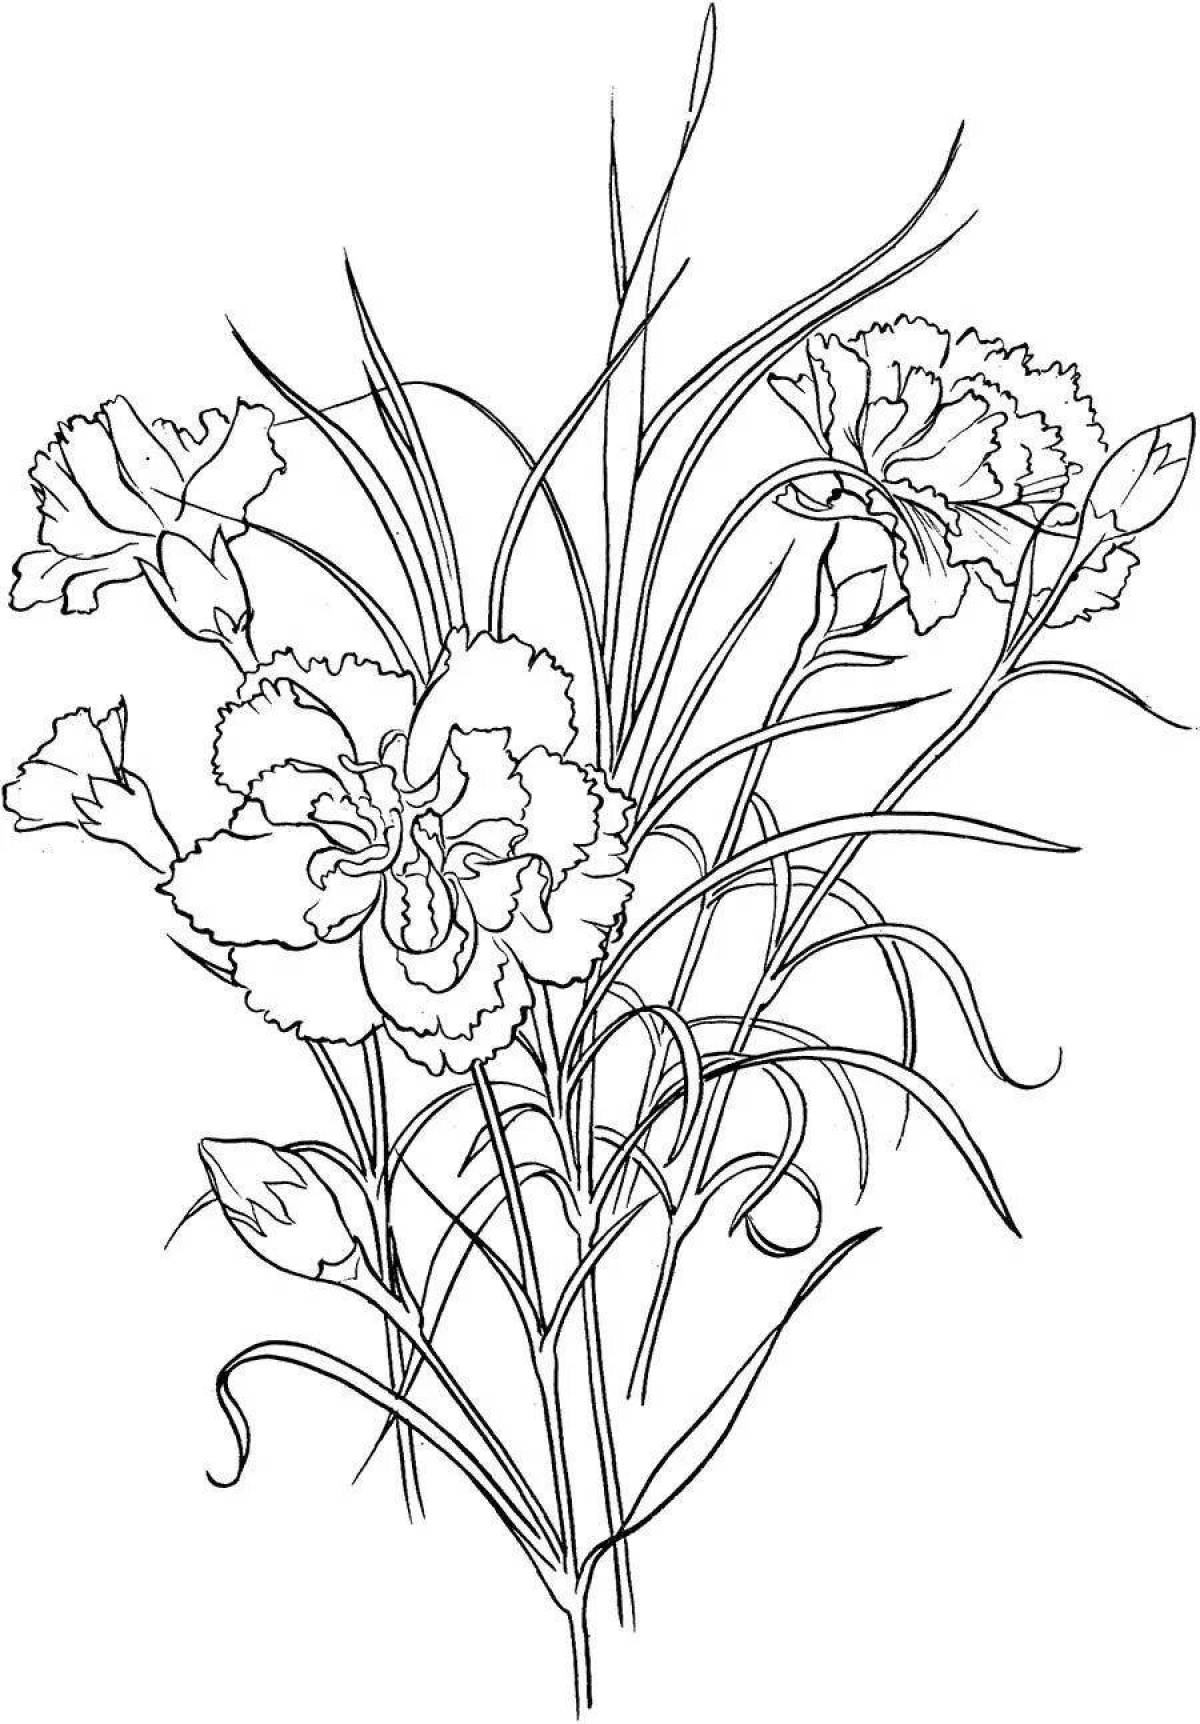 Coloring book sweet carnation for children